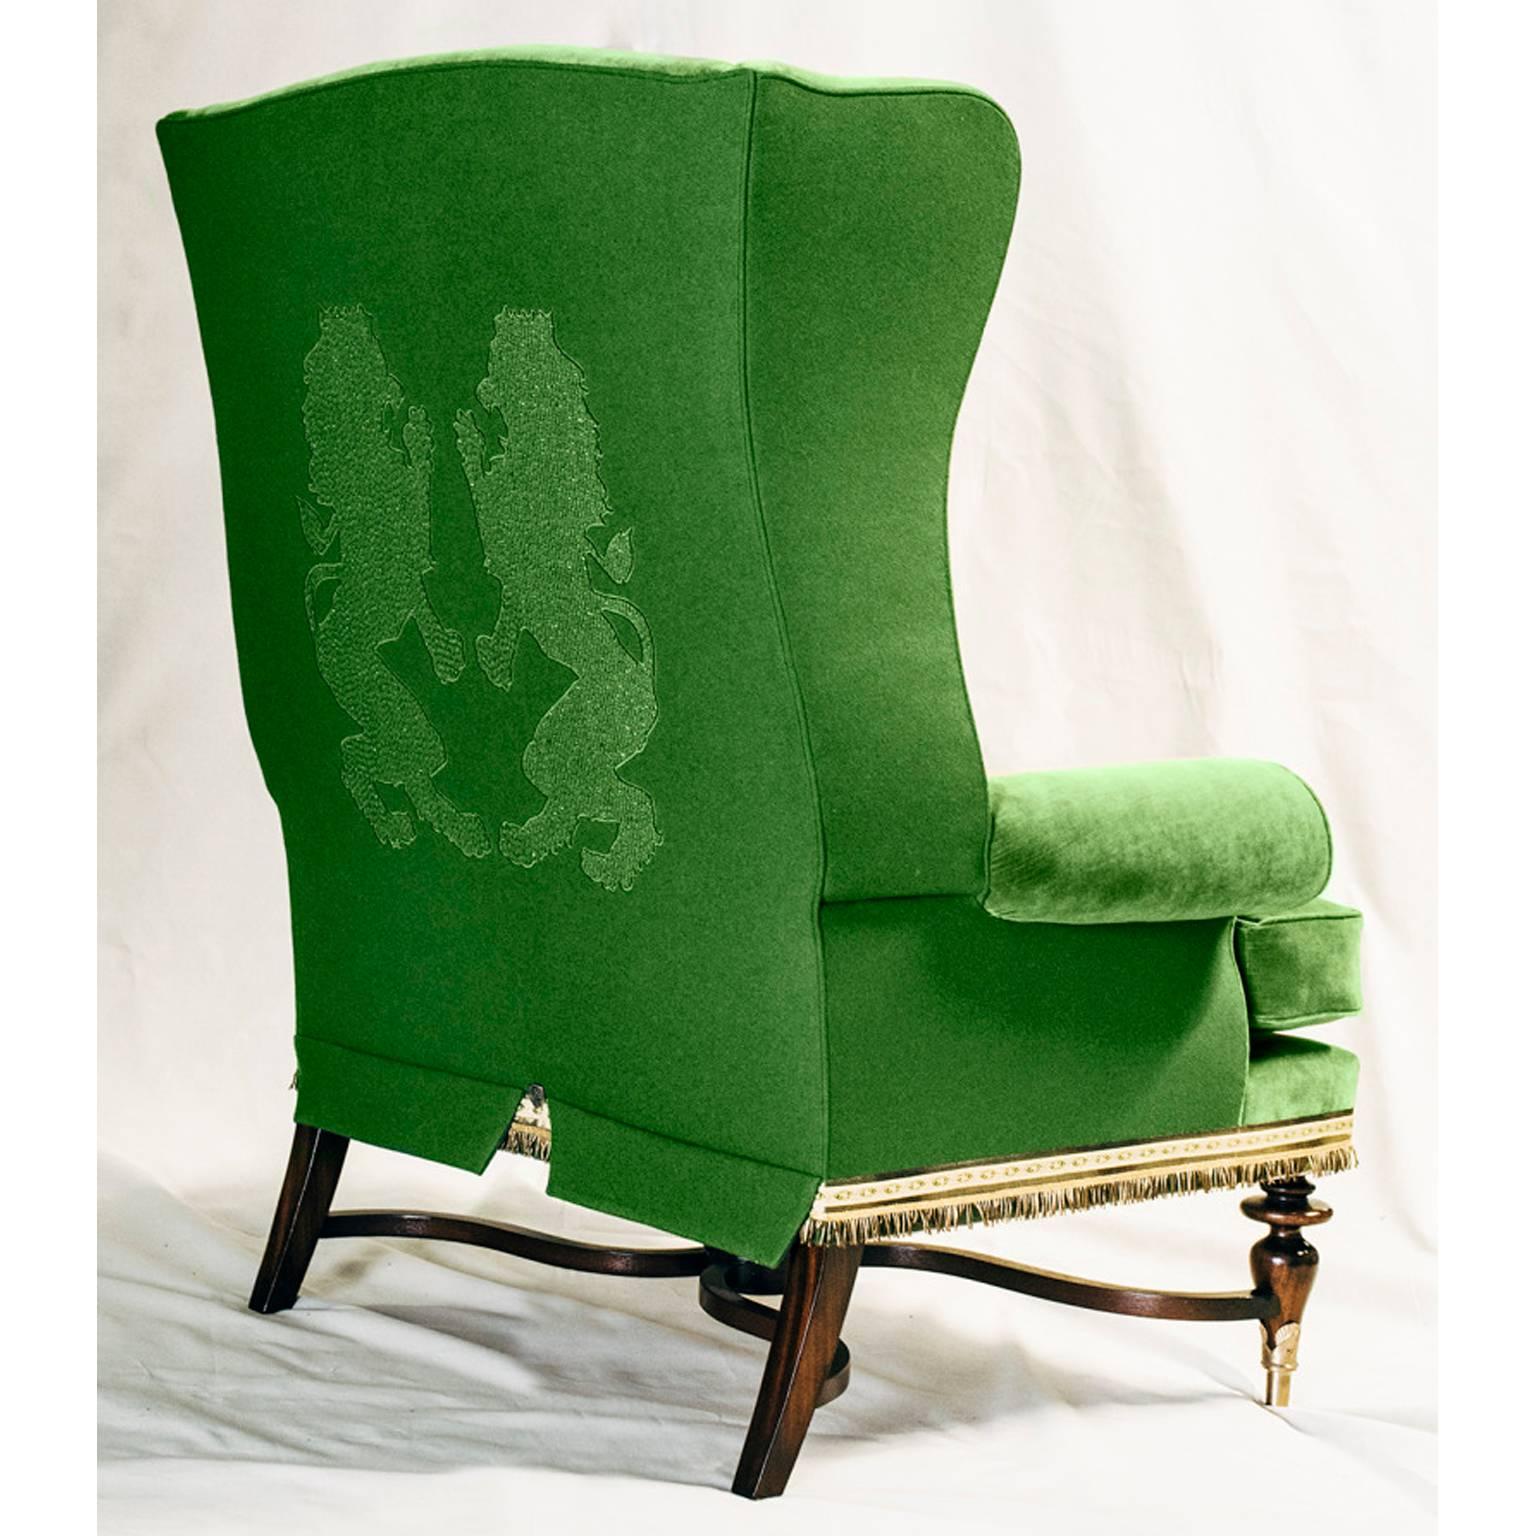 The highland chair collection inspiration by a gentleman’s study set within a manor house on the Isle of Skye. Our one of a kind highland wing chair with its exposed wood carved legs and struts encased in bronze ferrules hand crafted in Providence,